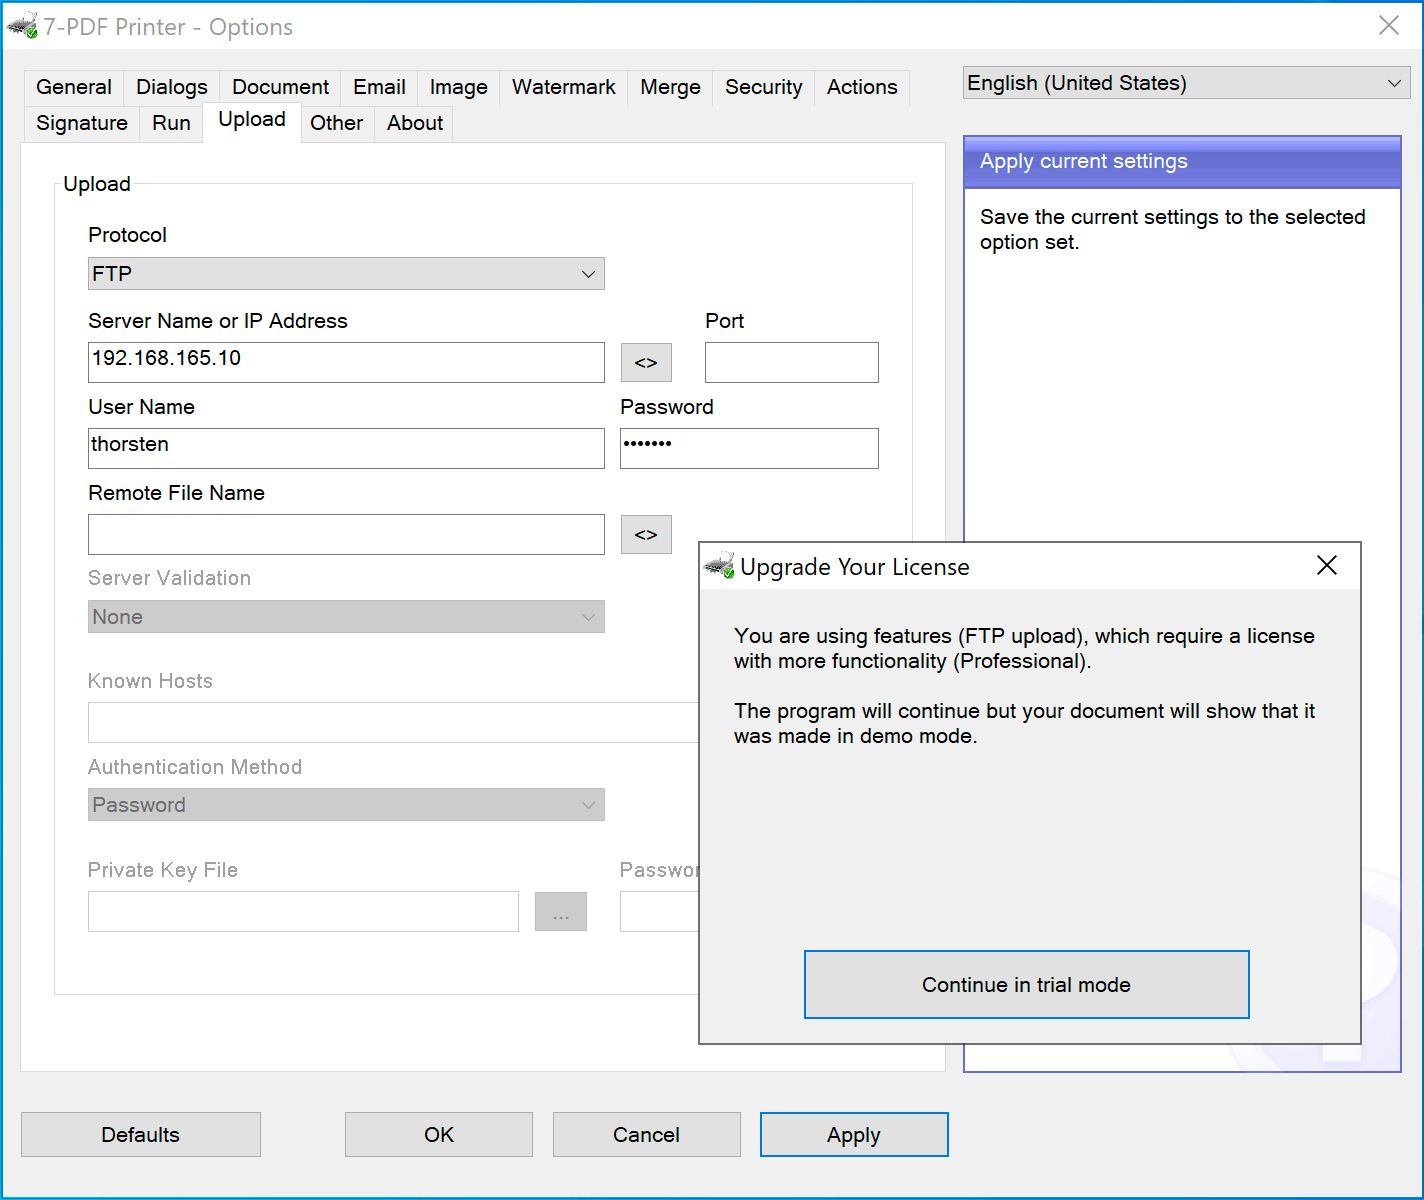 Tab UPLOAD in the options dialog of the printer